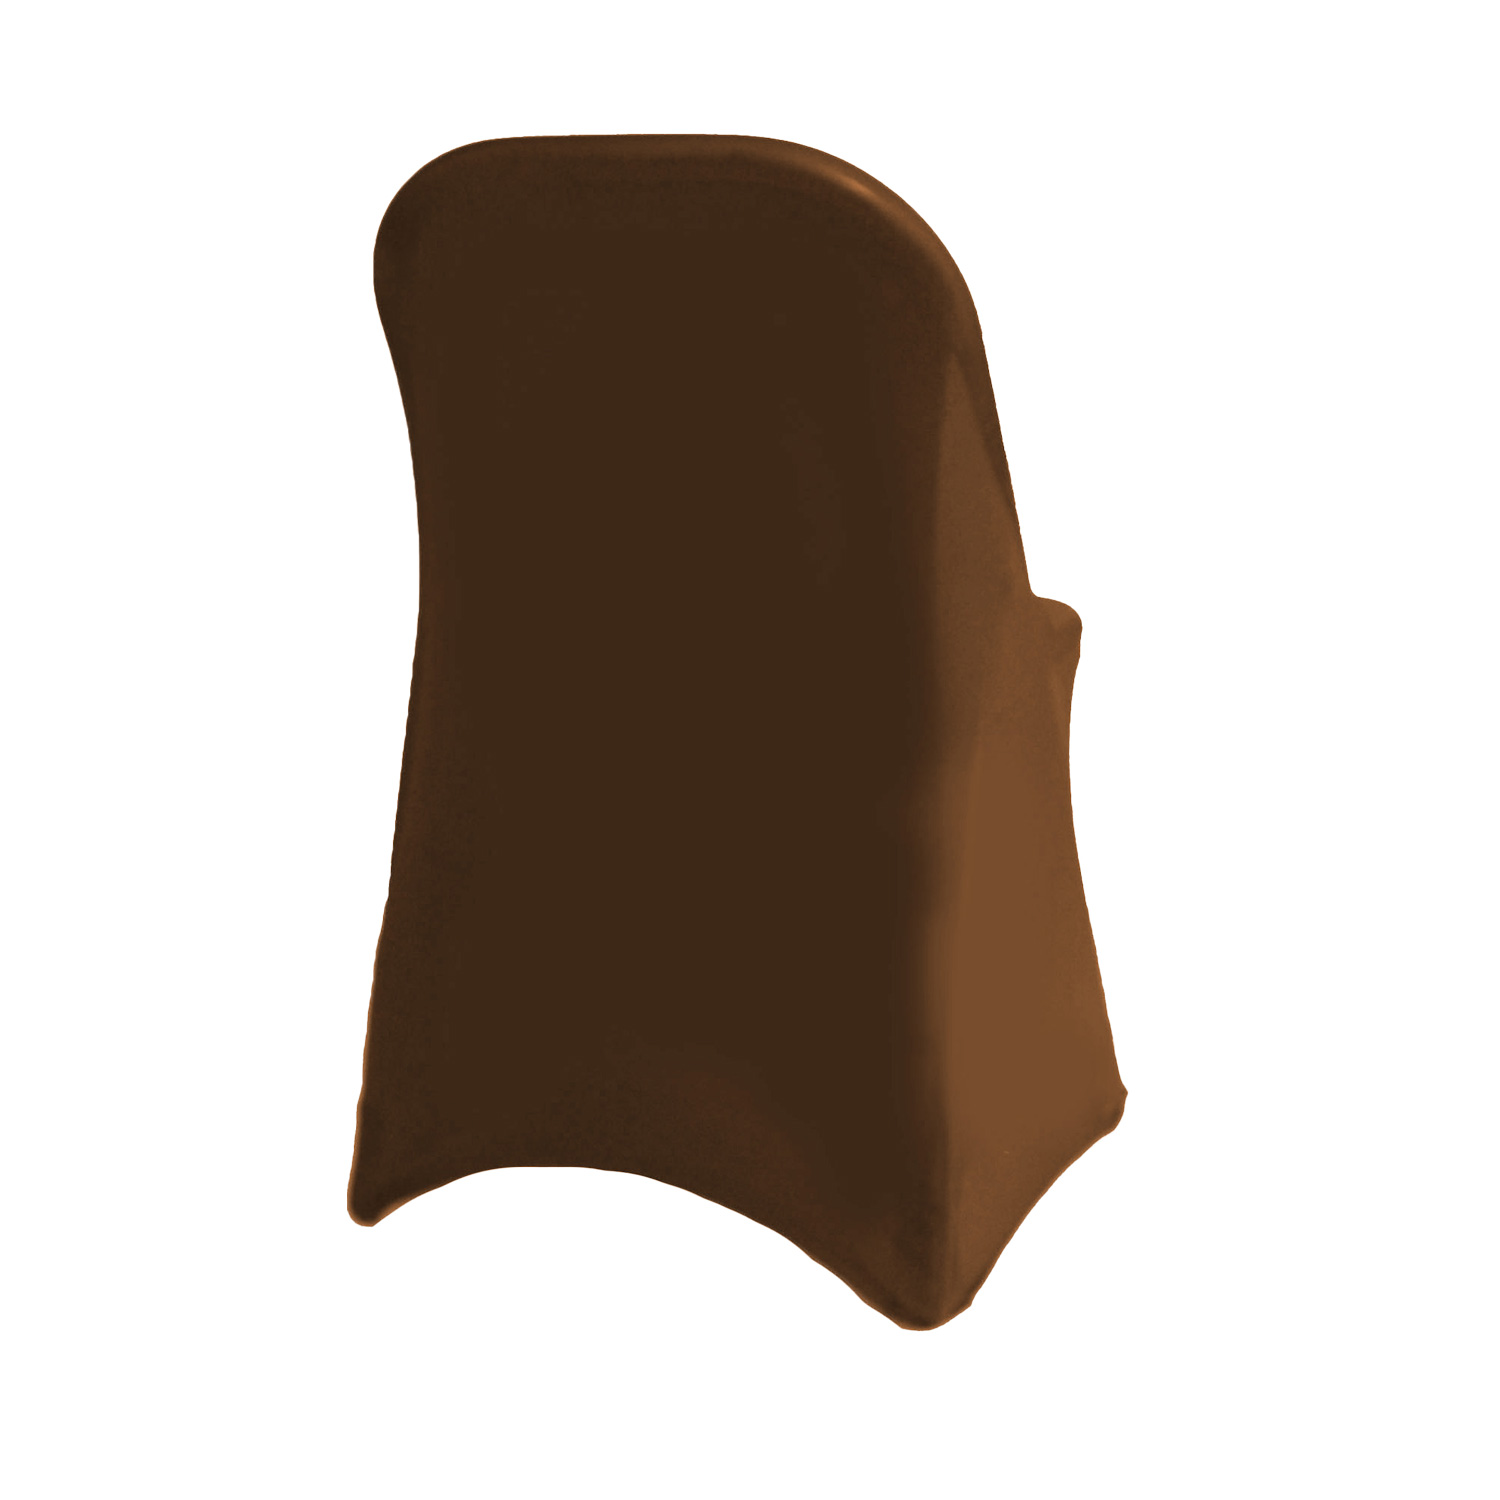 Your Chair Covers - Spandex Folding Chair Cover Chocolate Brown for Wedding, Party, Birthday, Patio, etc. - image 2 of 3